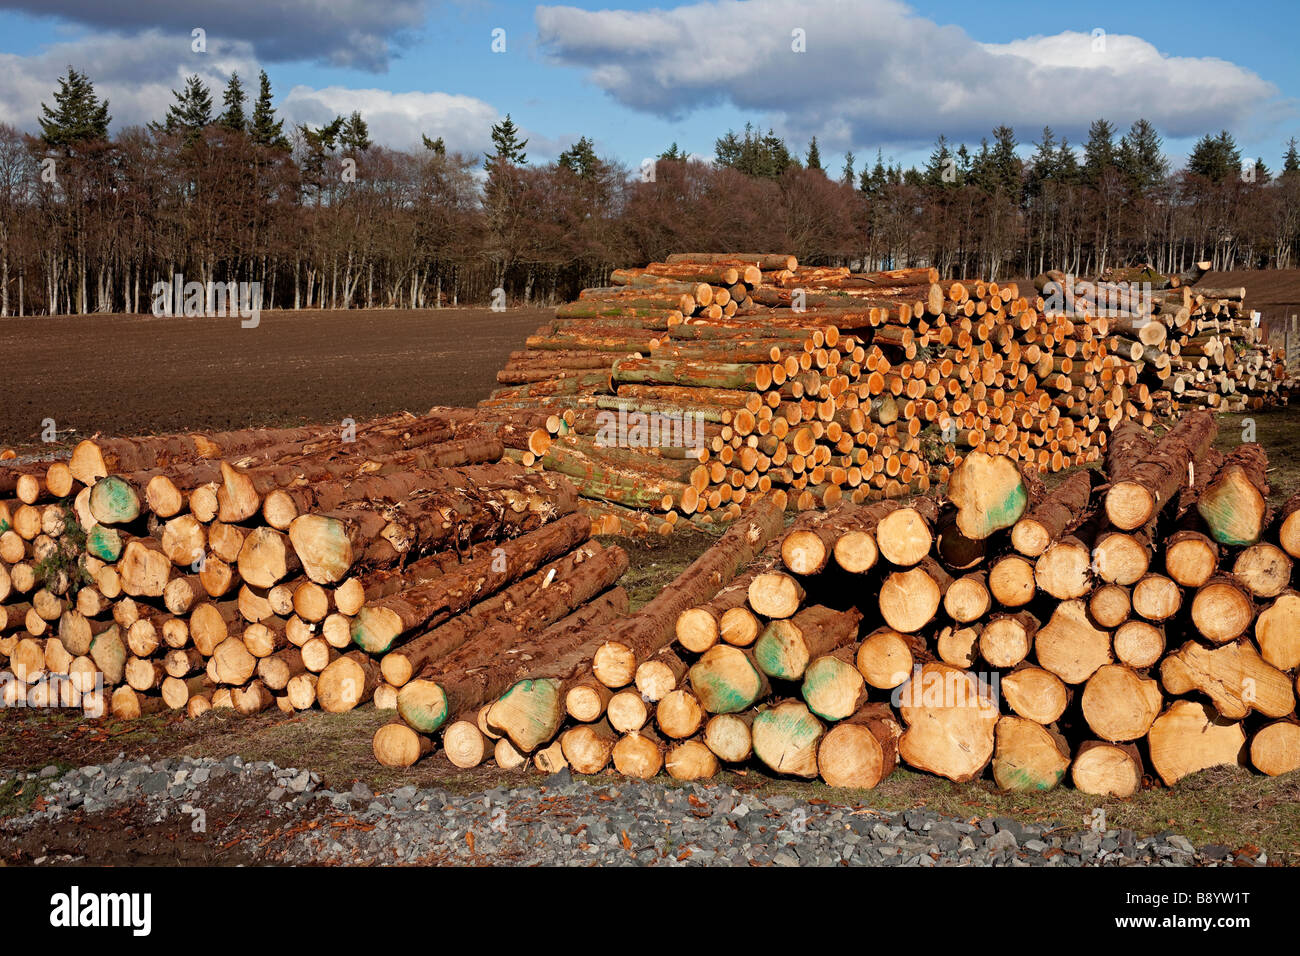 Piles of conifer timber logs, Perthshire, Scotland, UK, Europe Stock Photo